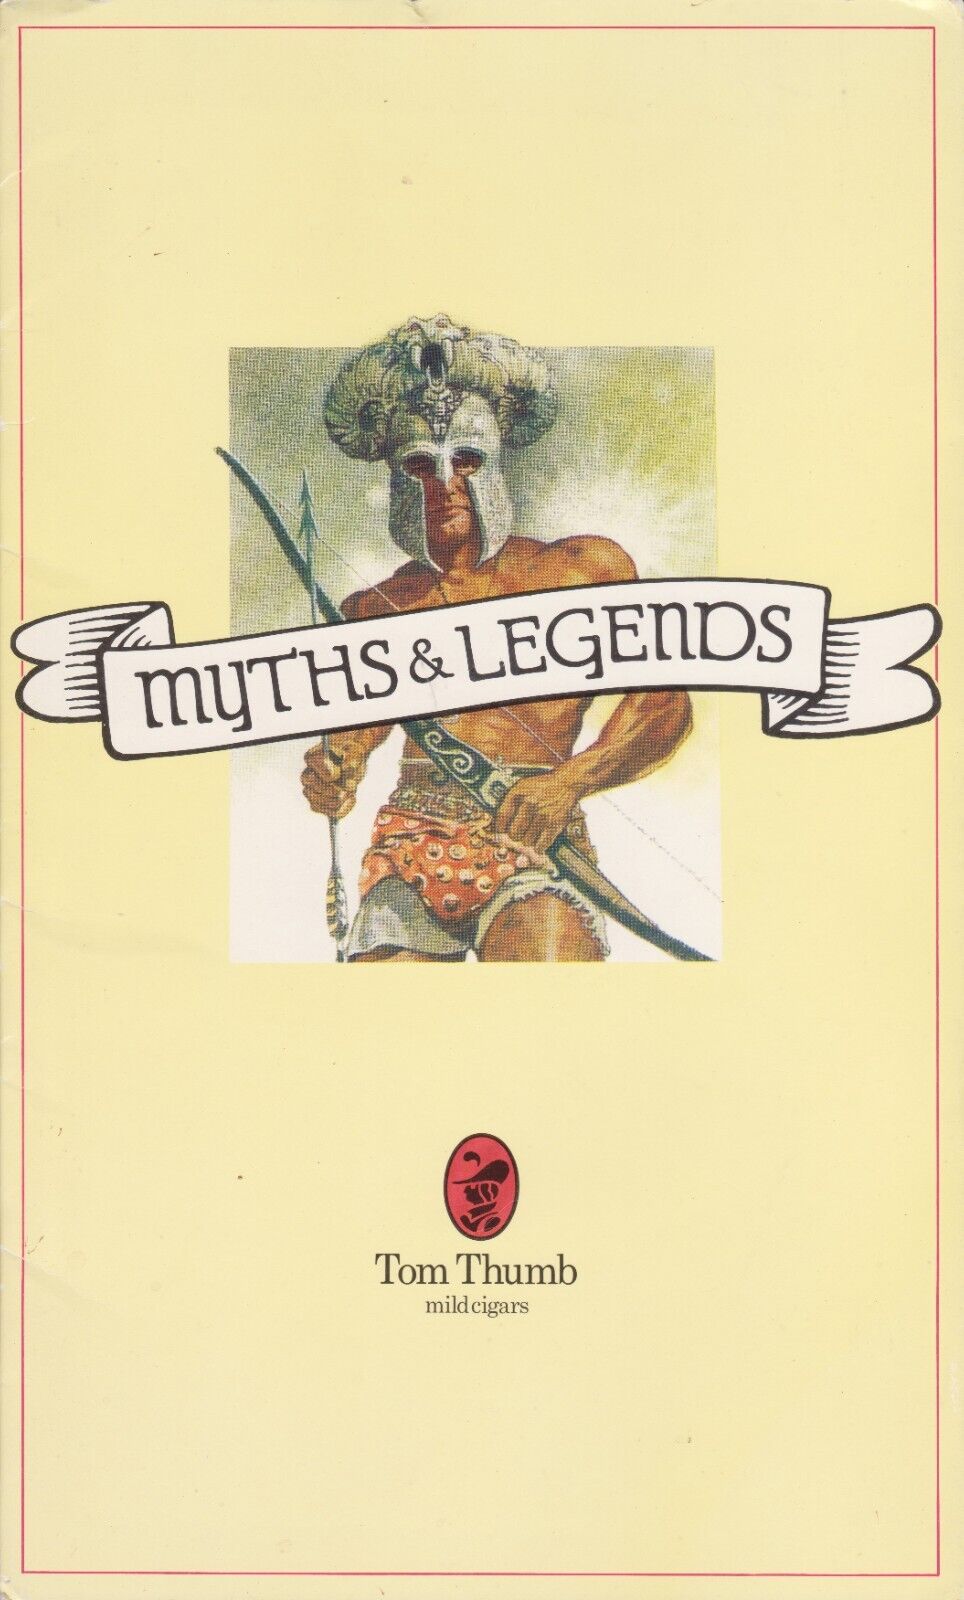 Players Tom Thumb Official Cards Album Myths & Legends 1981 UNUSED